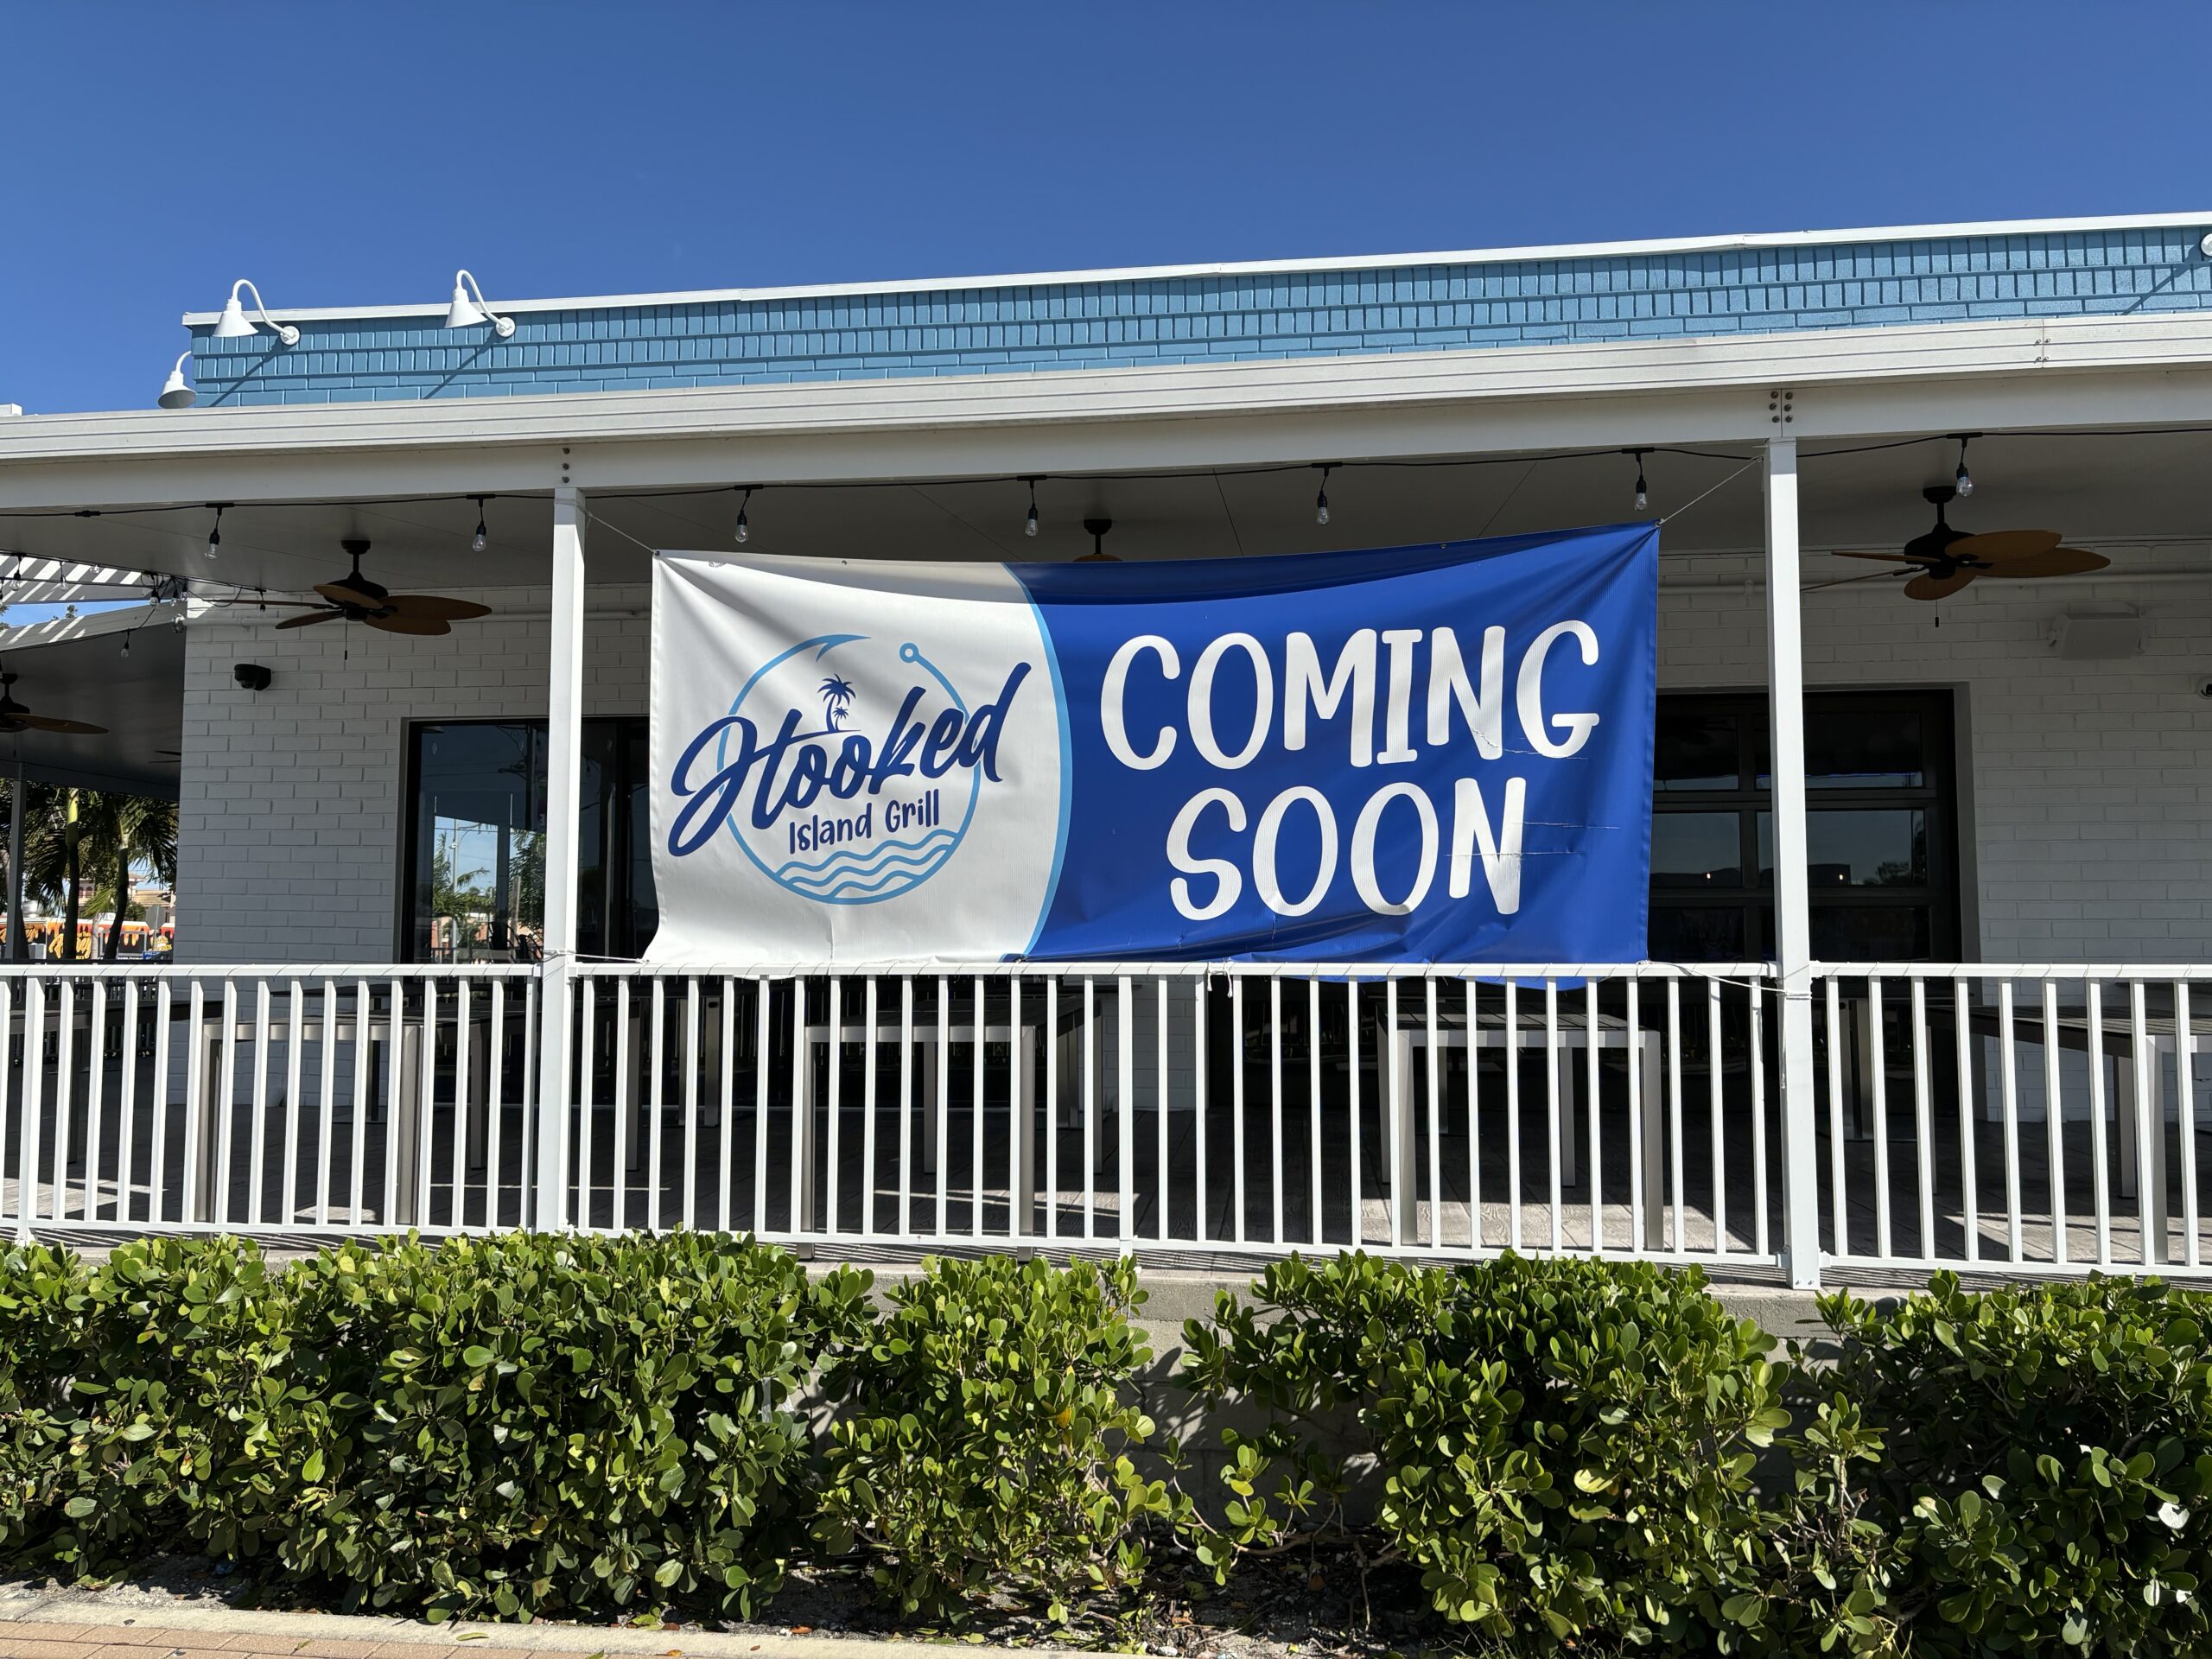 Hooked Island Grill in south Cape Coral